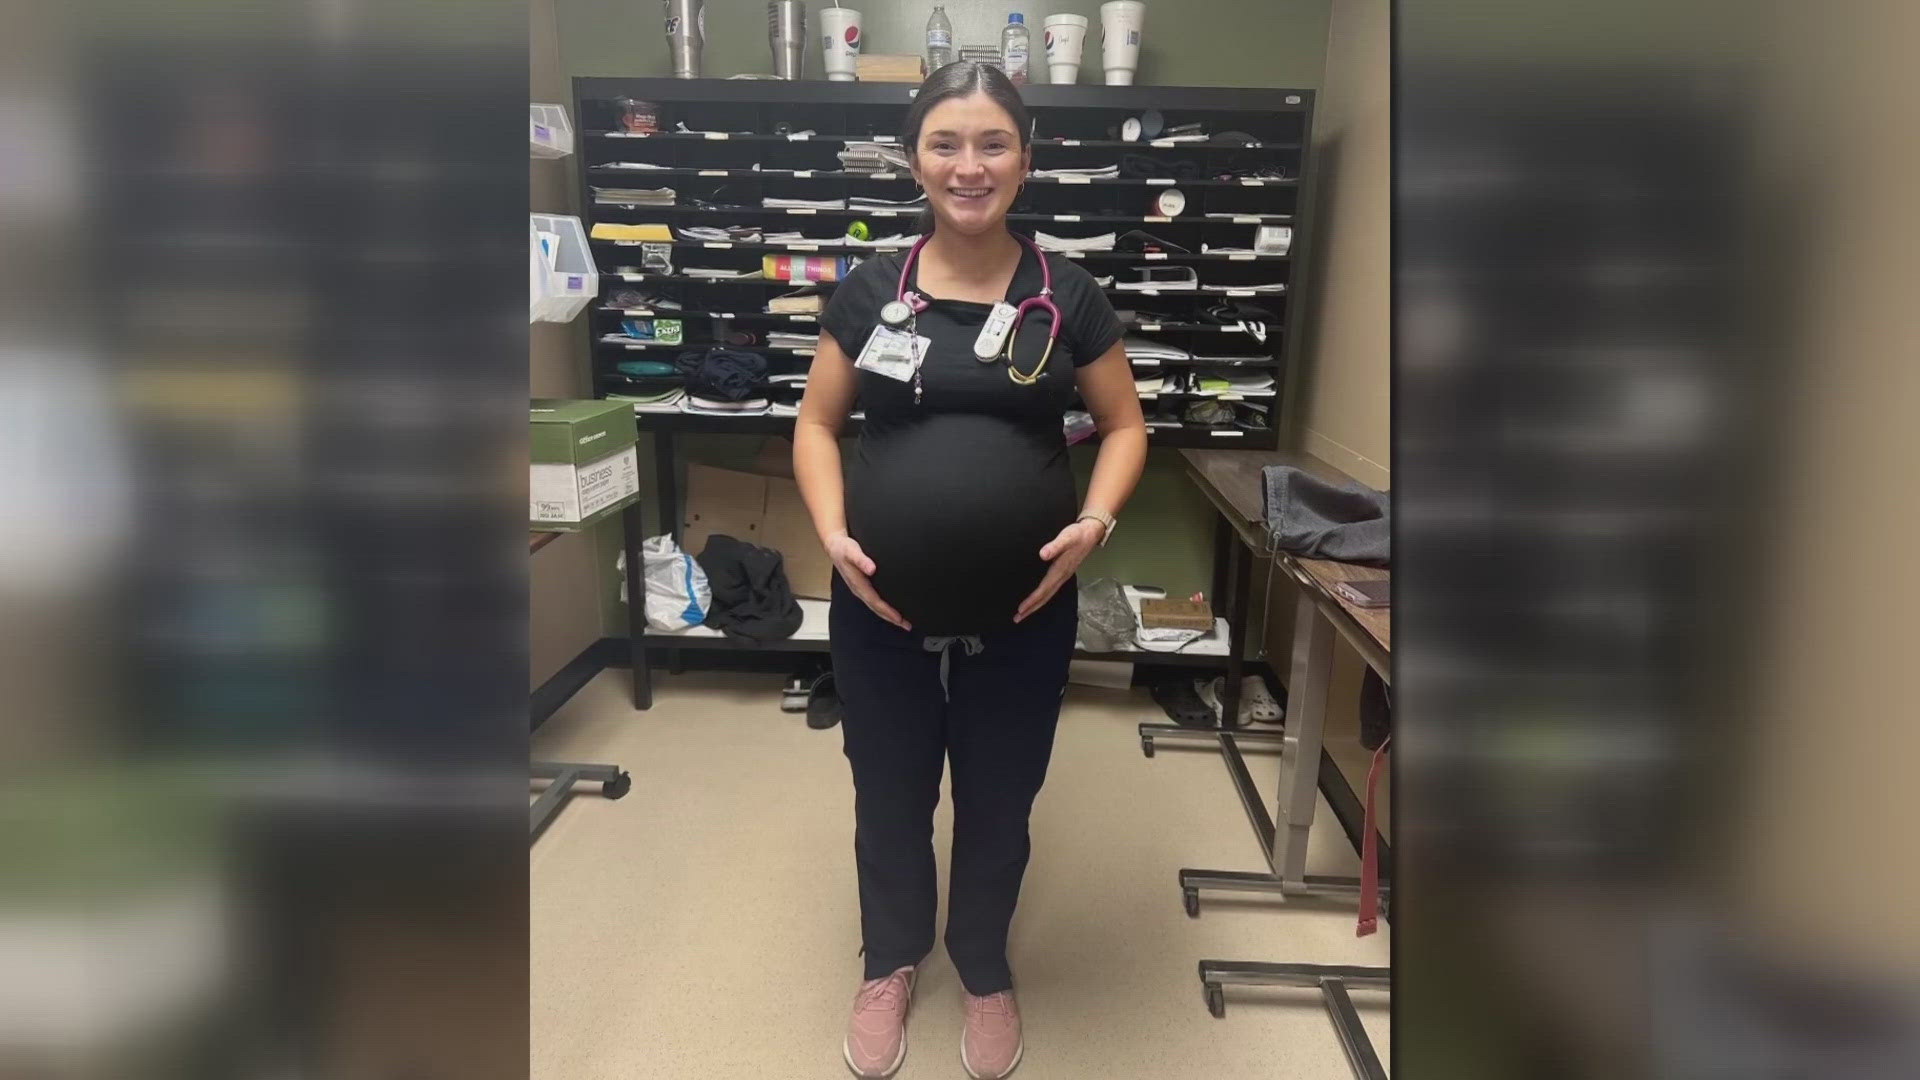 The Arizona midwife who oversaw a home birth where the mother and infant died in December has had a meeting with state health officials.